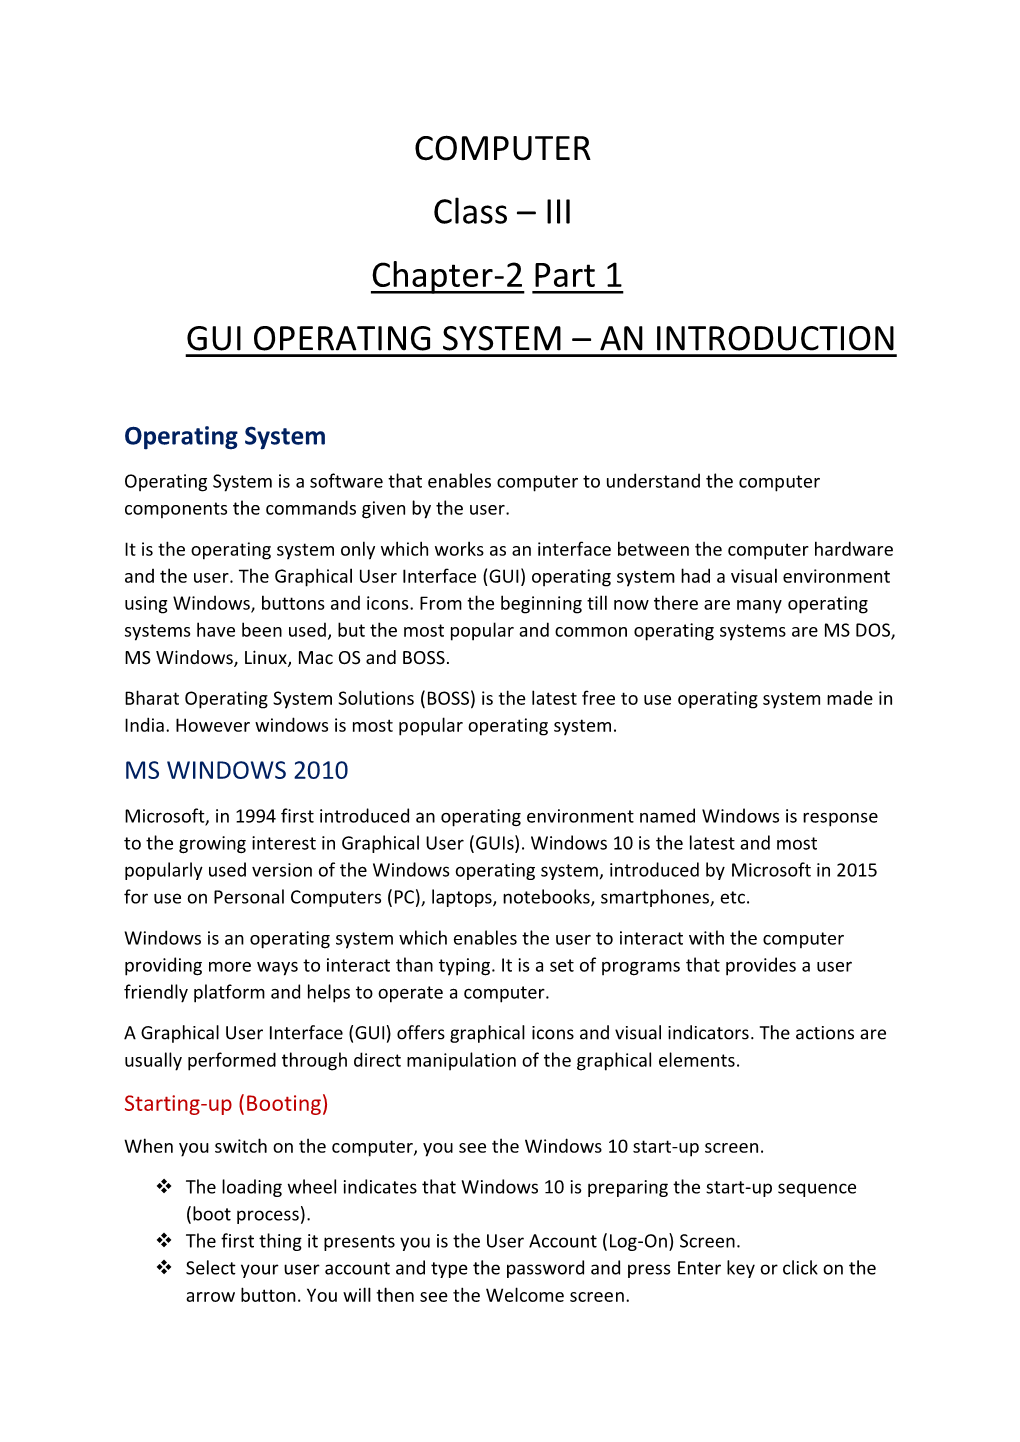 COMPUTER Class – III Chapter-2 Part 1 GUI OPERATING SYSTEM – an INTRODUCTION